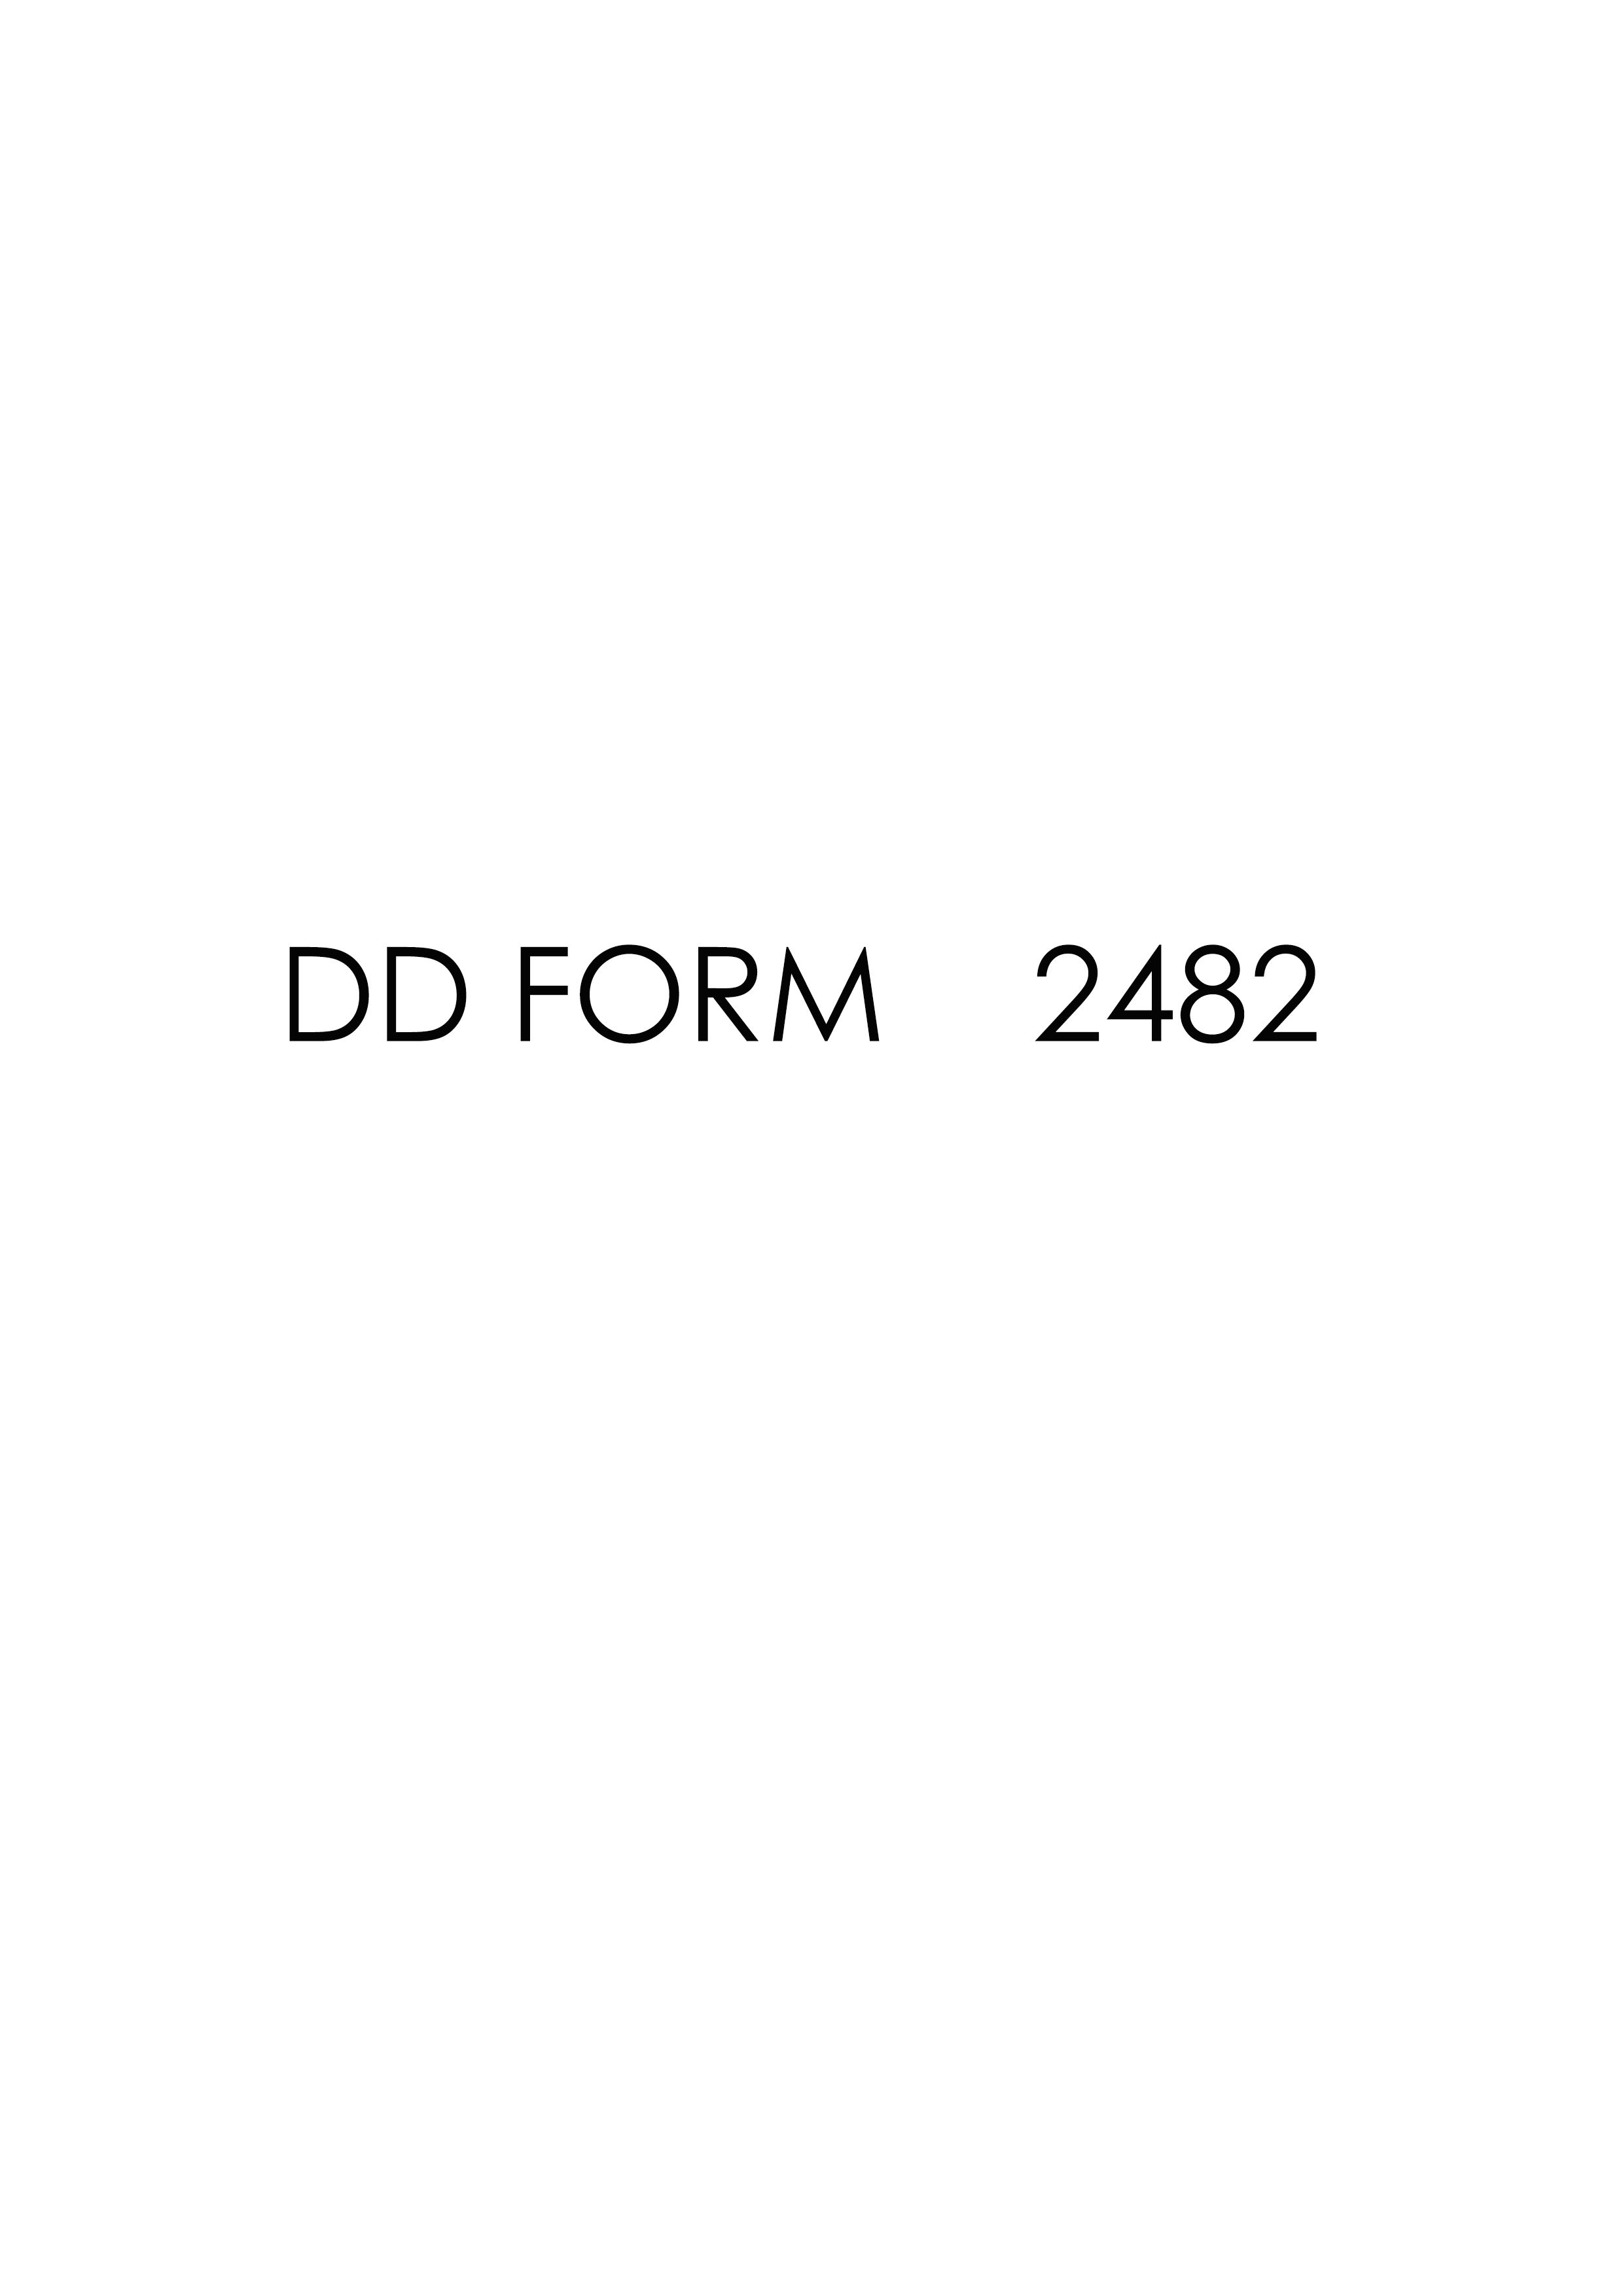 Download Fillable dd Form 2482